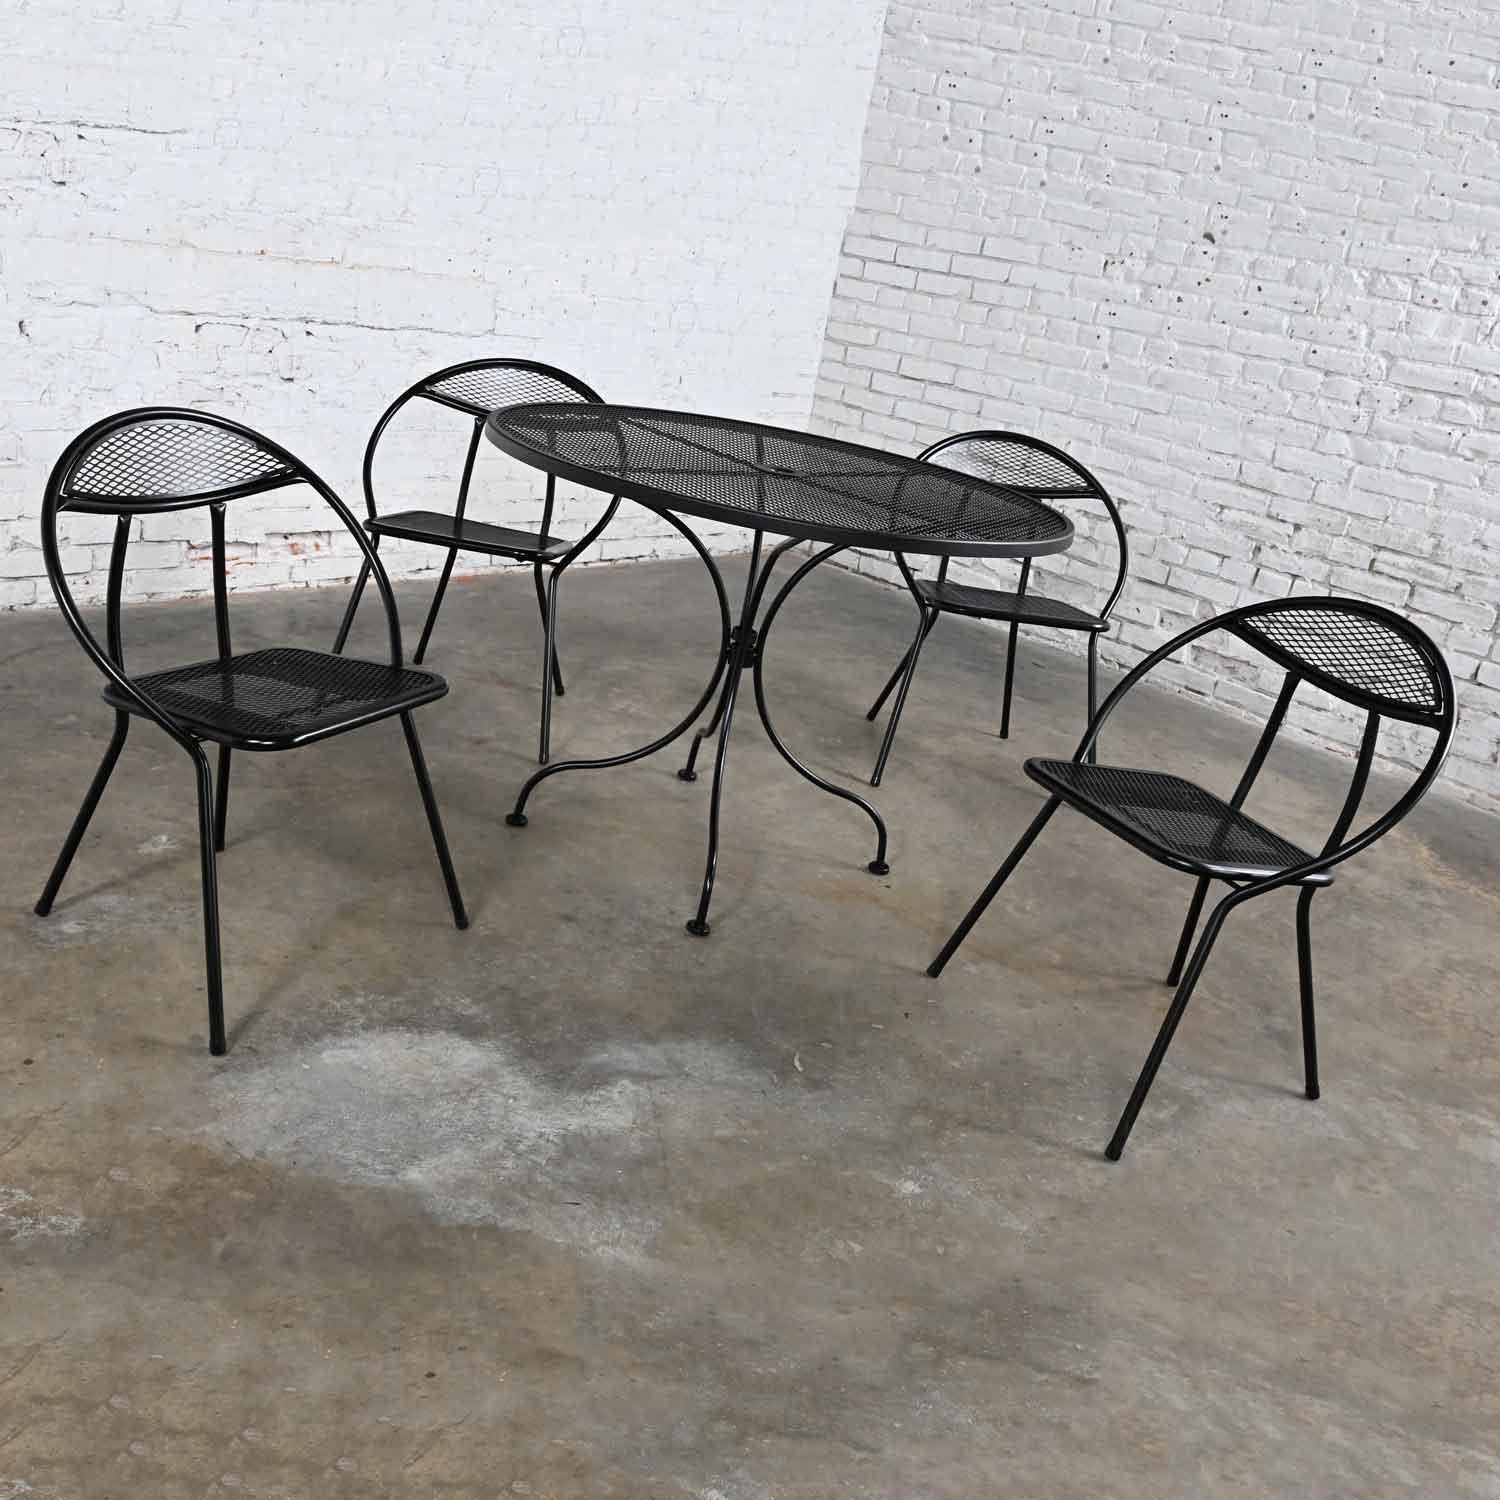 Awesome vintage MCM (mid-century modern) black painted outdoor dining set of 4 Rid-Jid Hoop chairs comprised of tubular steel folding chairs paired with a newer wrought iron round dining table with expanded metal top, umbrella hole, and solid rod